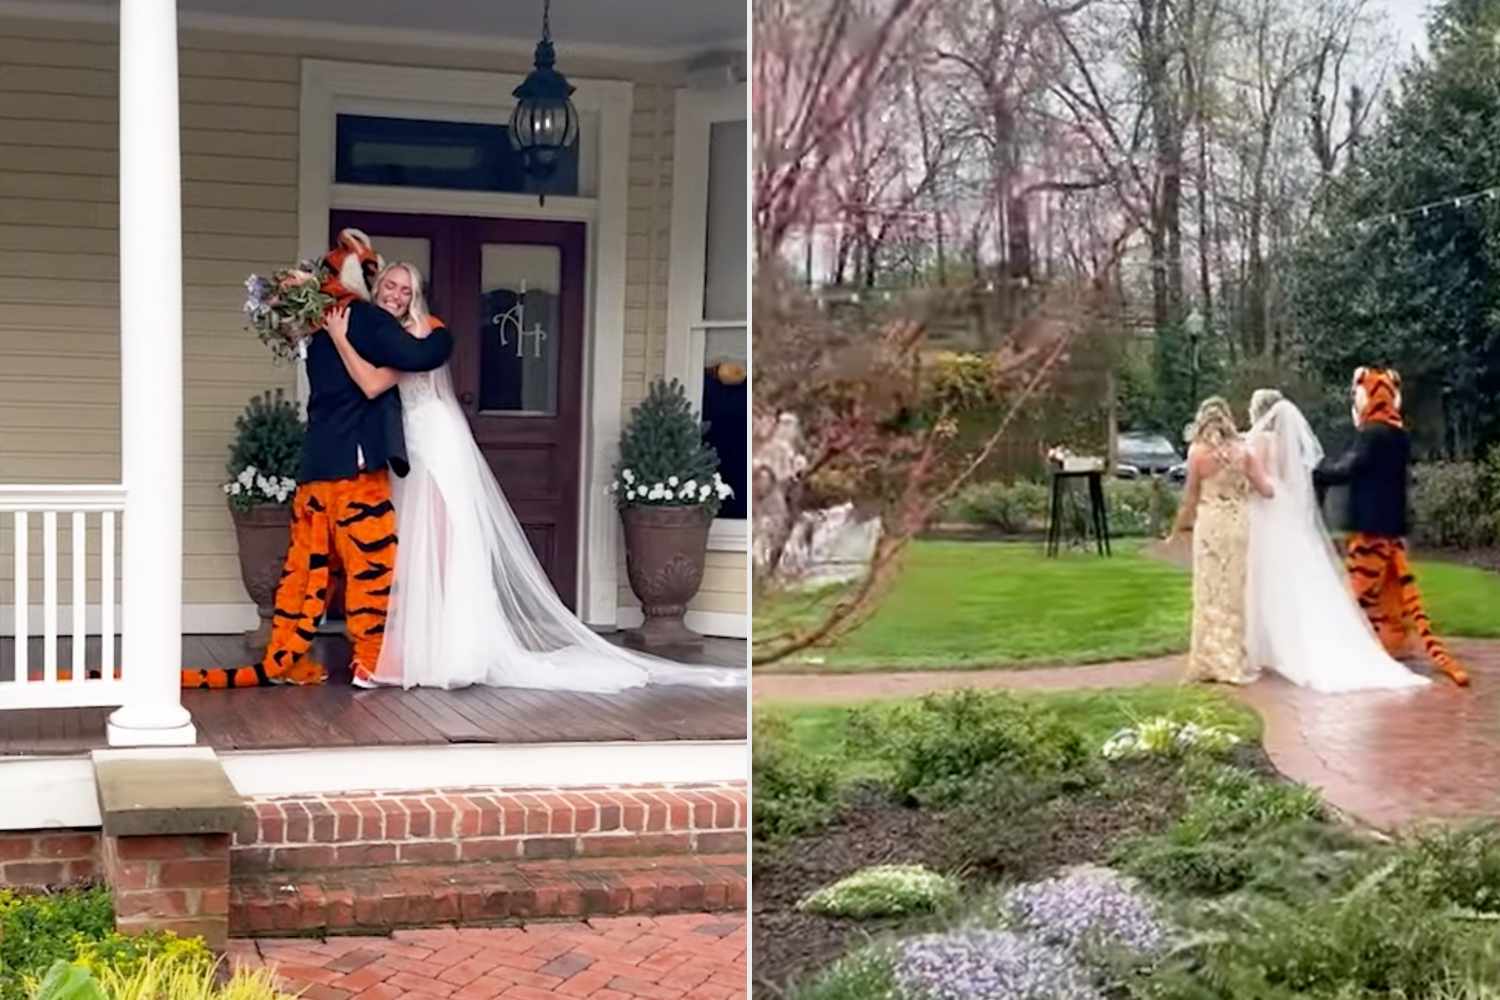 Clemson Tiger Surprises Bride by Walking Her Down the Aisle on Wedding Day: ‘This Is Incredible!’